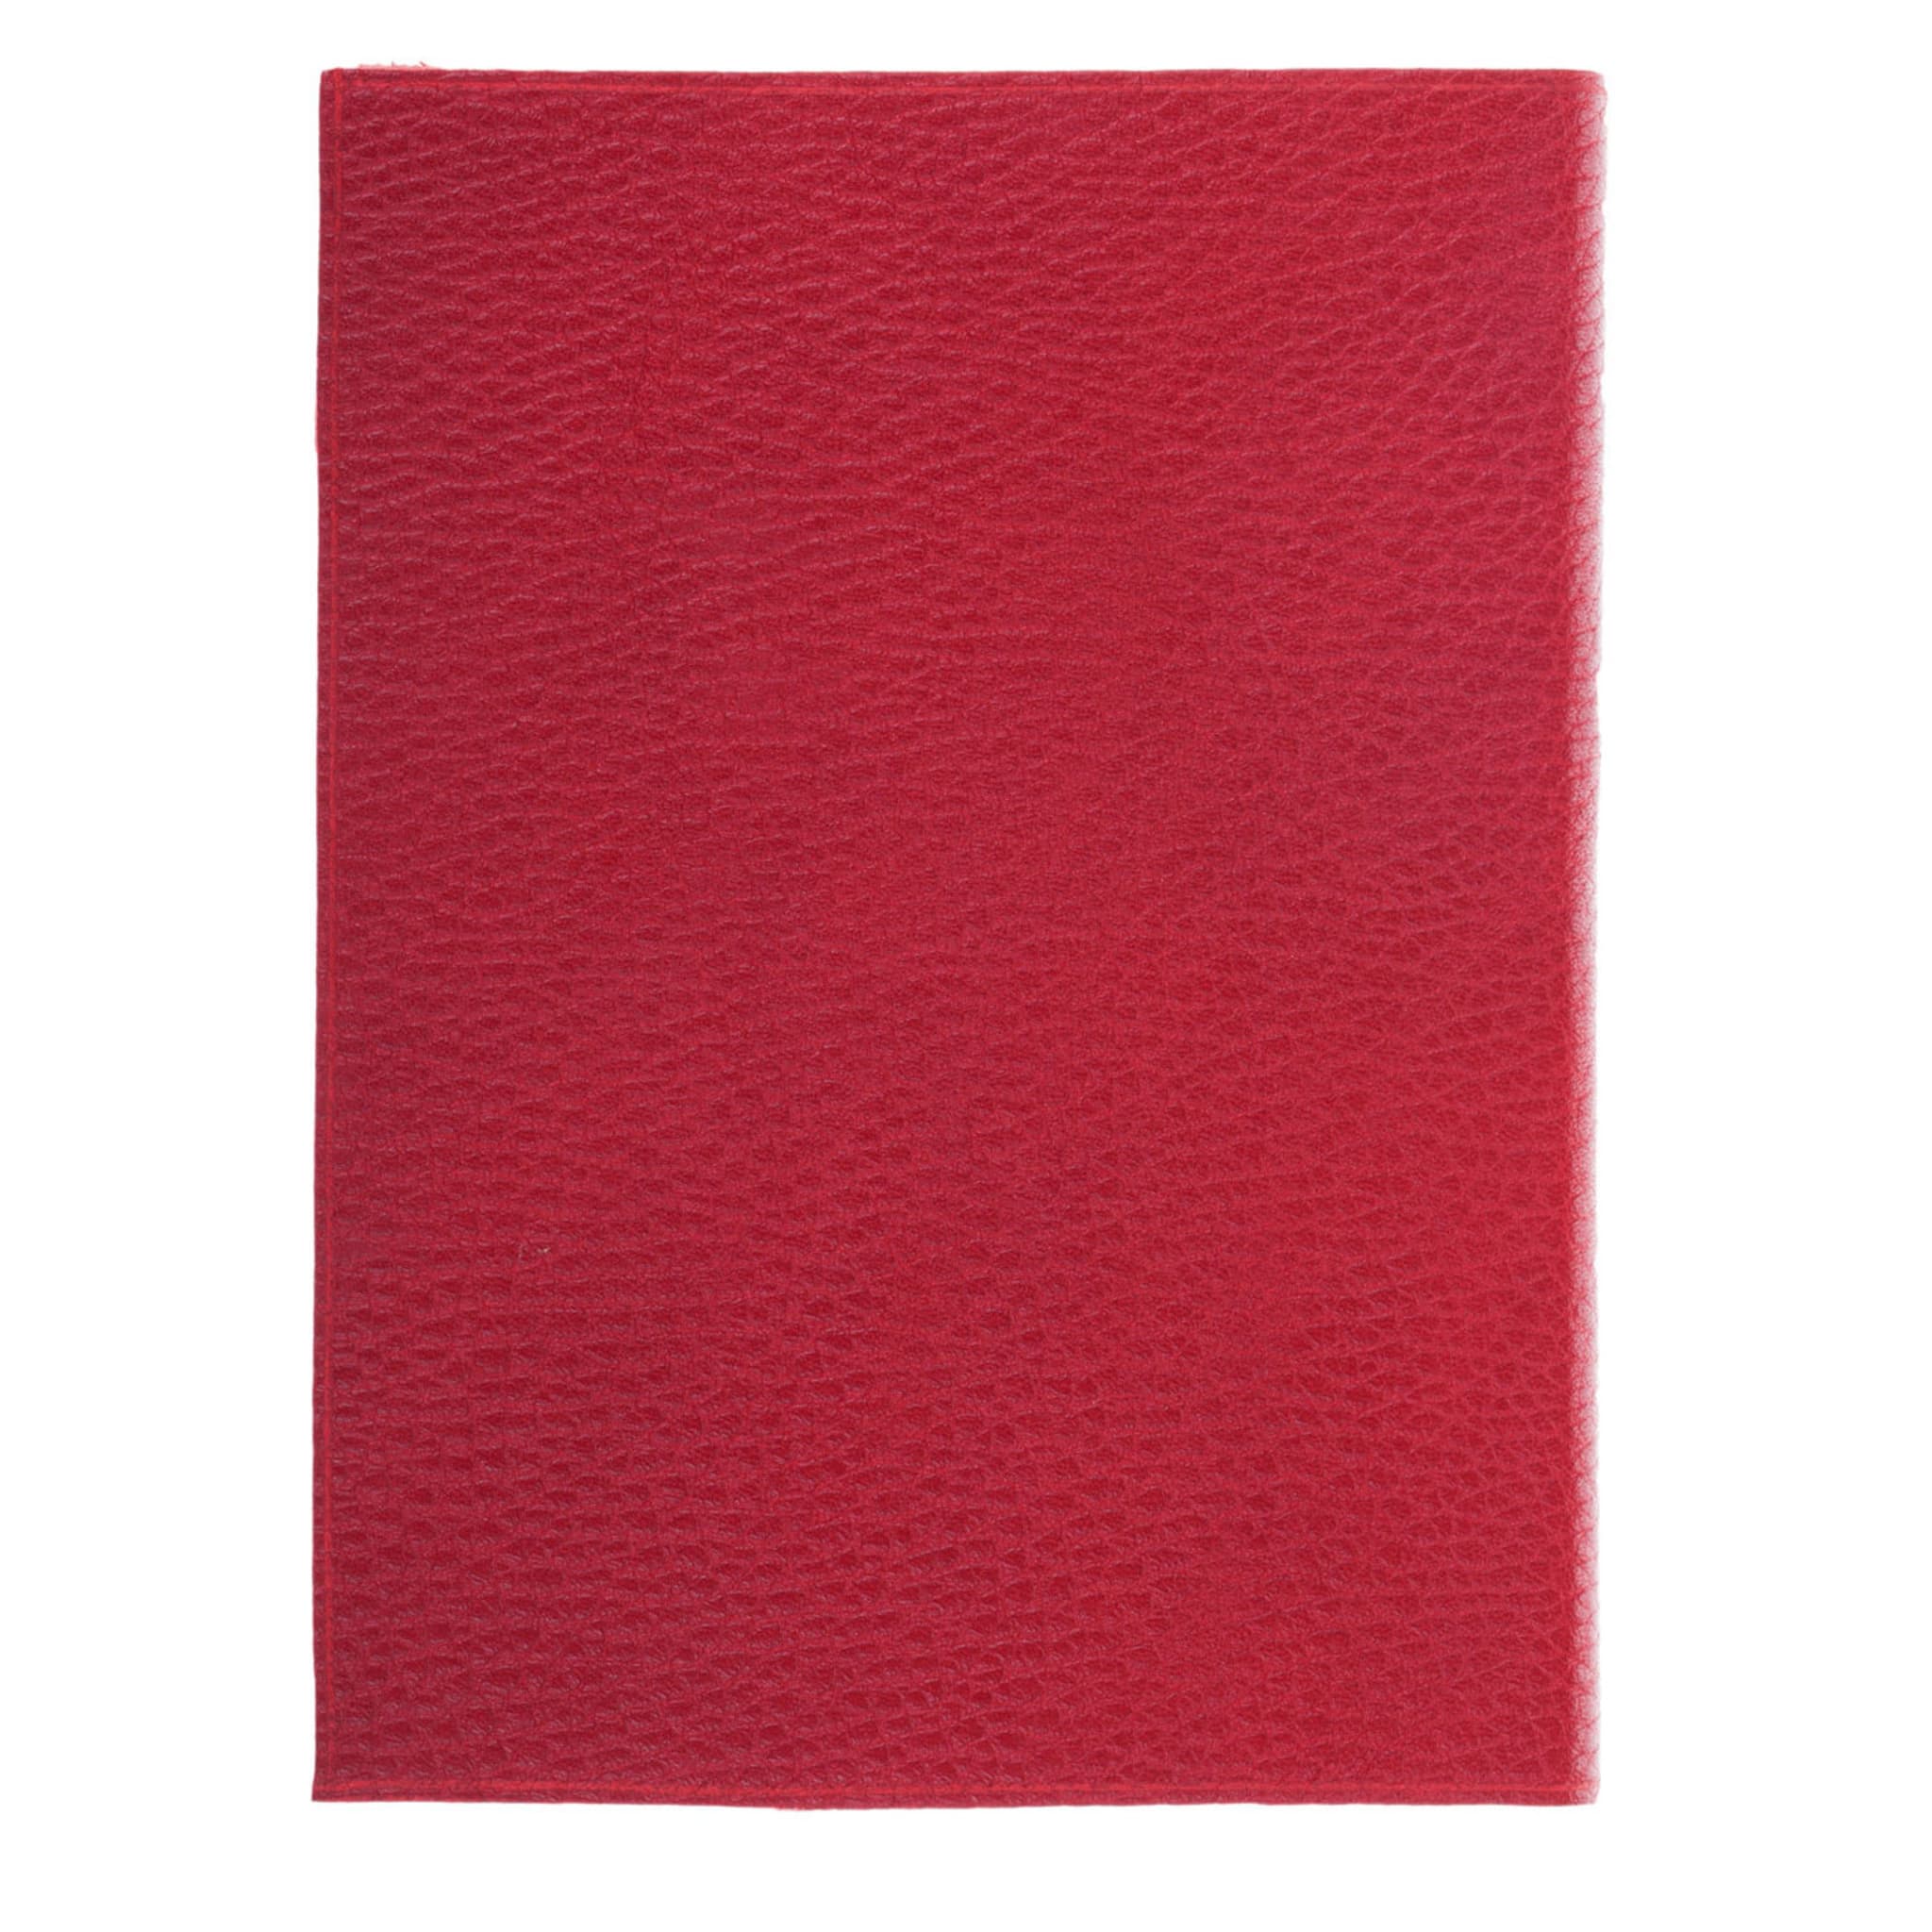 Rossino Leather Notebook - Alternative view 3